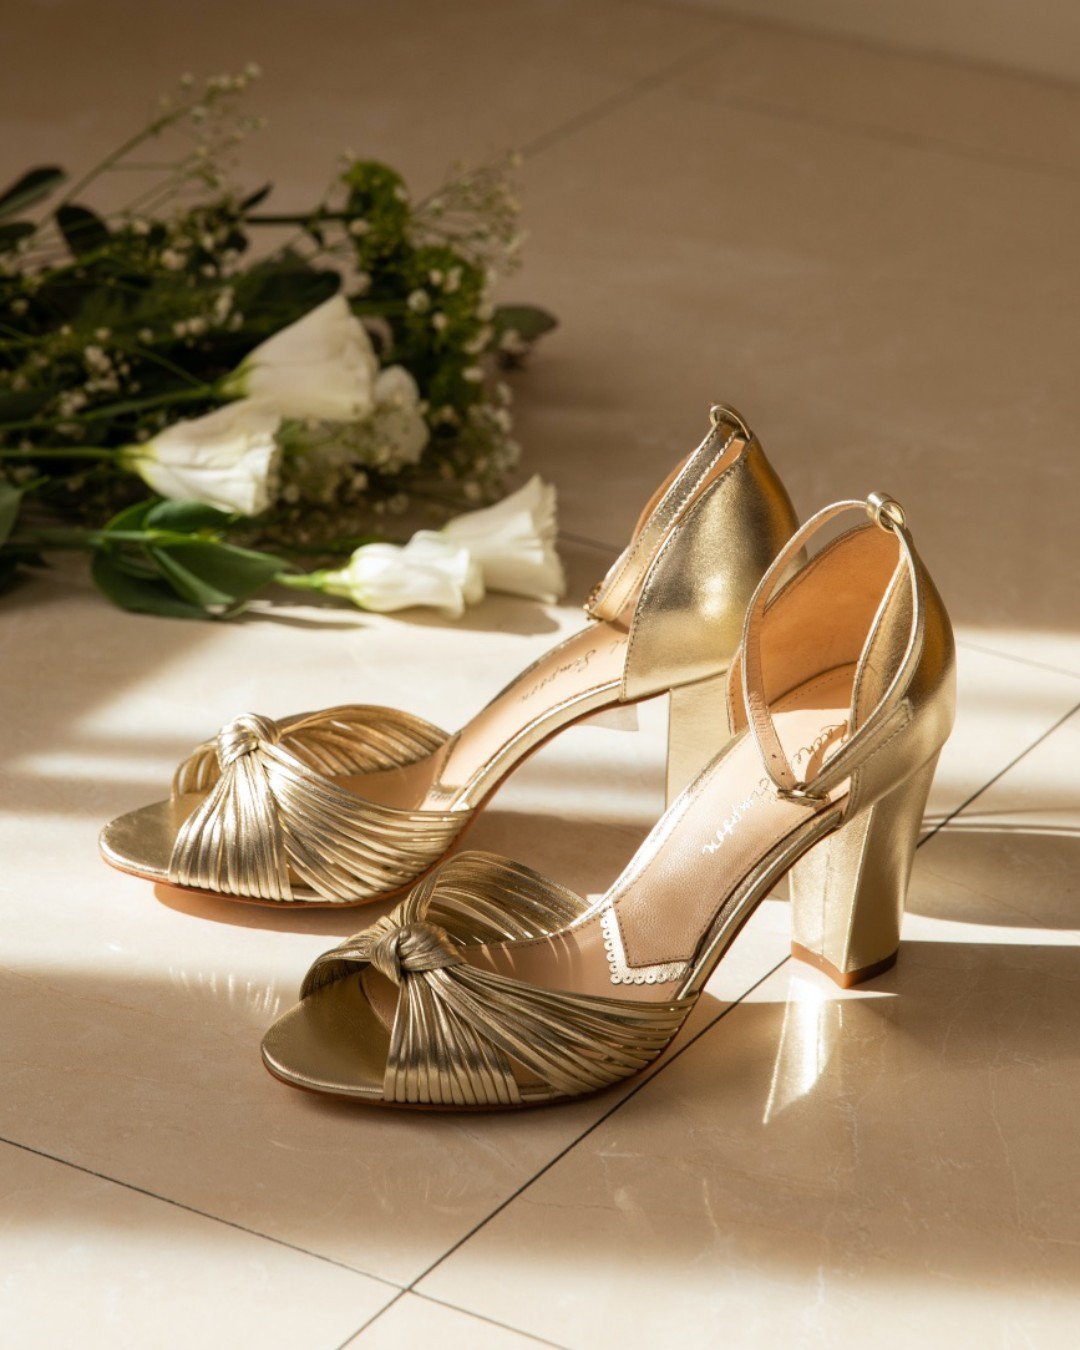 wedding shoes gold with low heels rachelsimpsonshoes